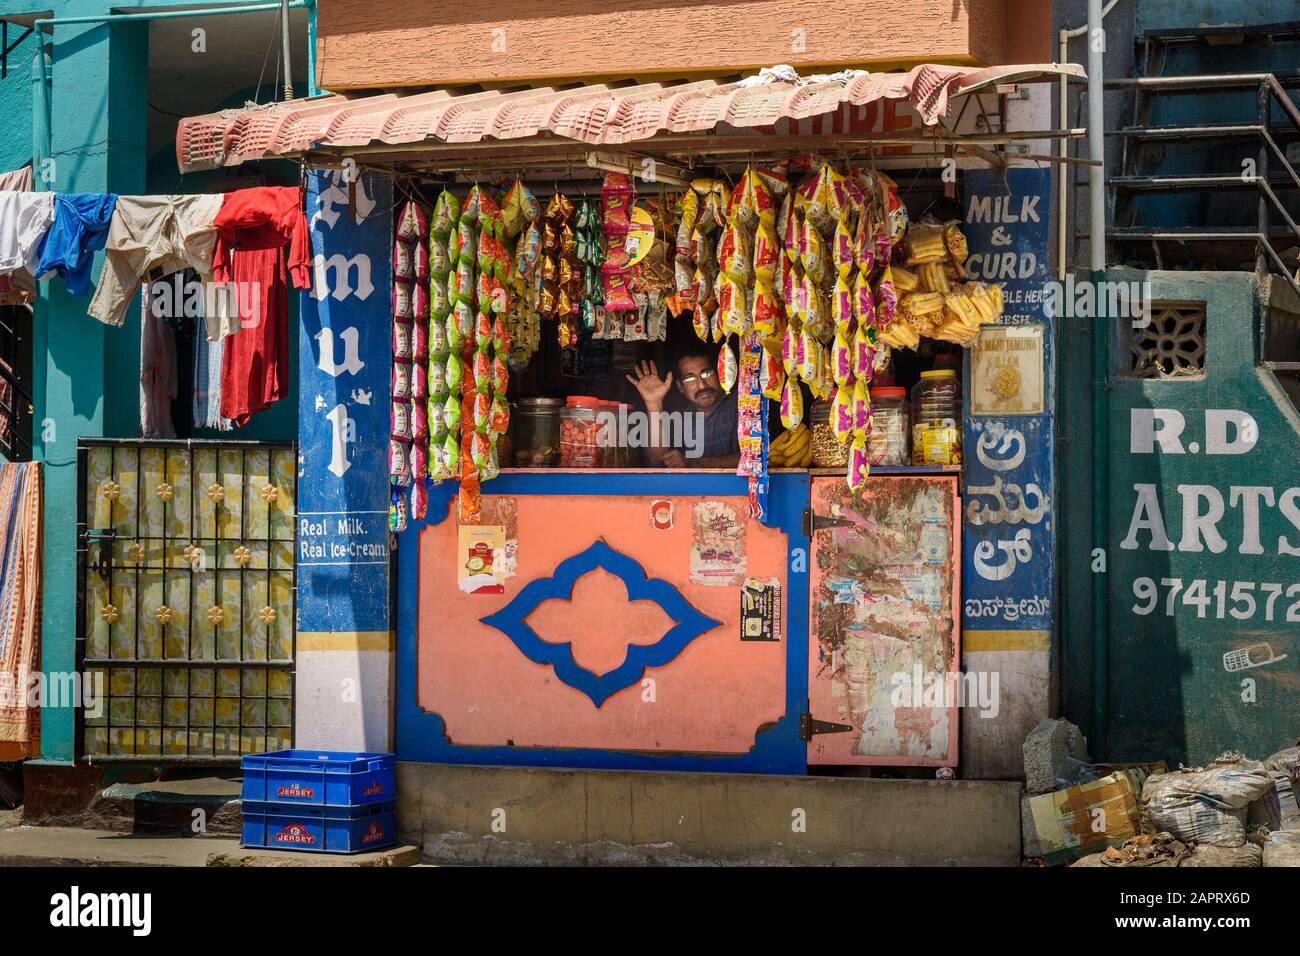 https://c8.alamy.com/comp/2APRX6D/tradition-small-shop-in-bangalore-india-2APRX6D.jpg